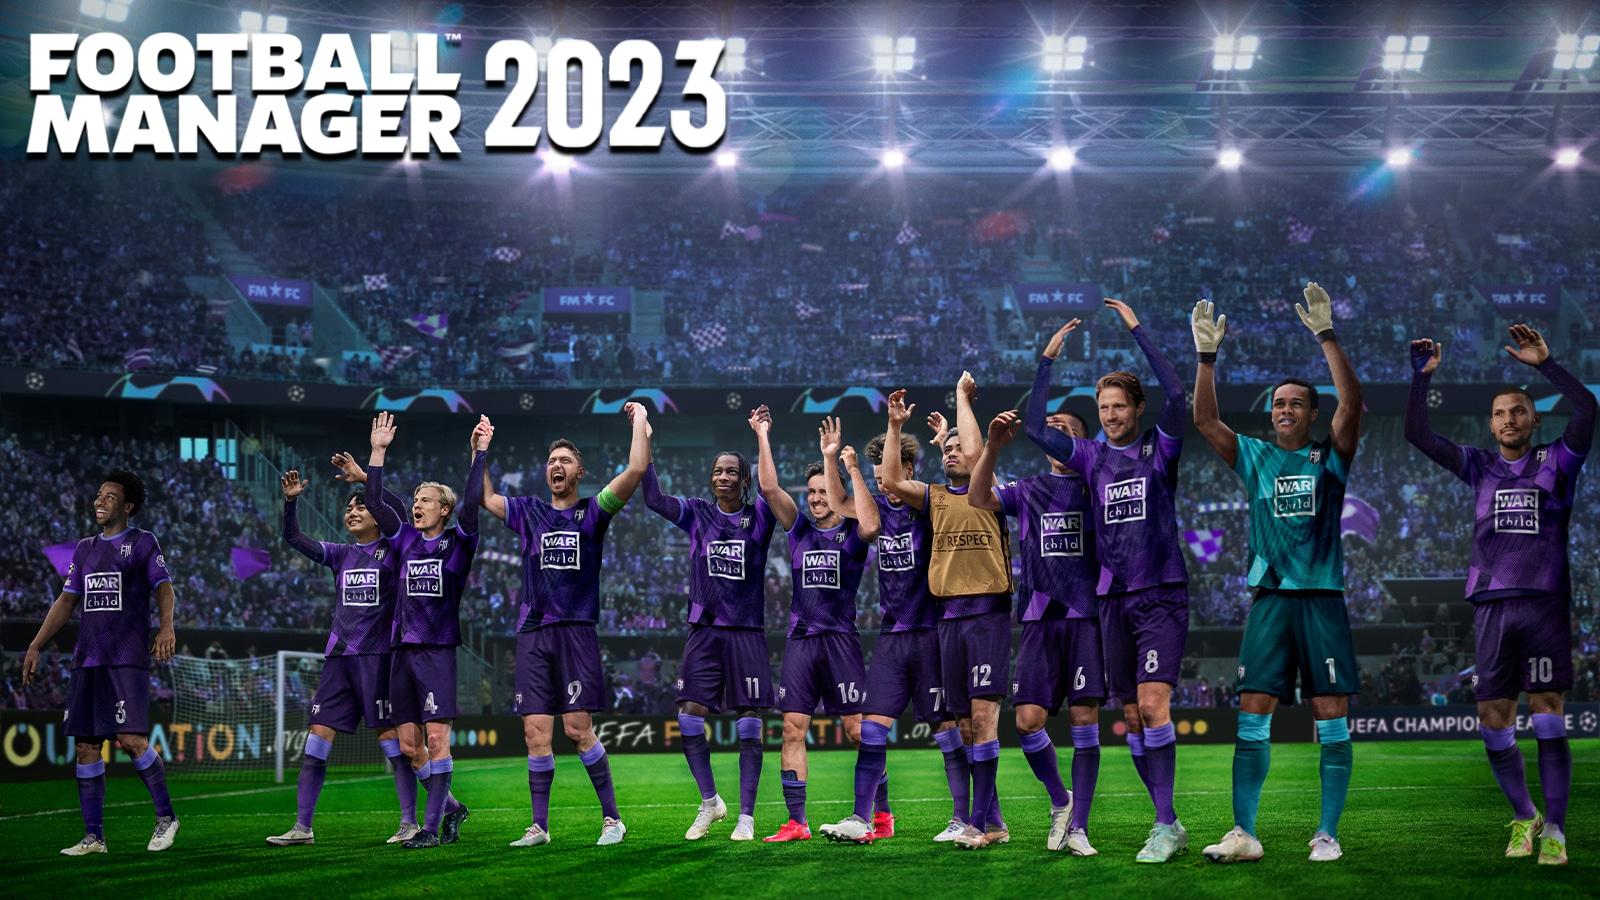 official Football Manager 2023 poster